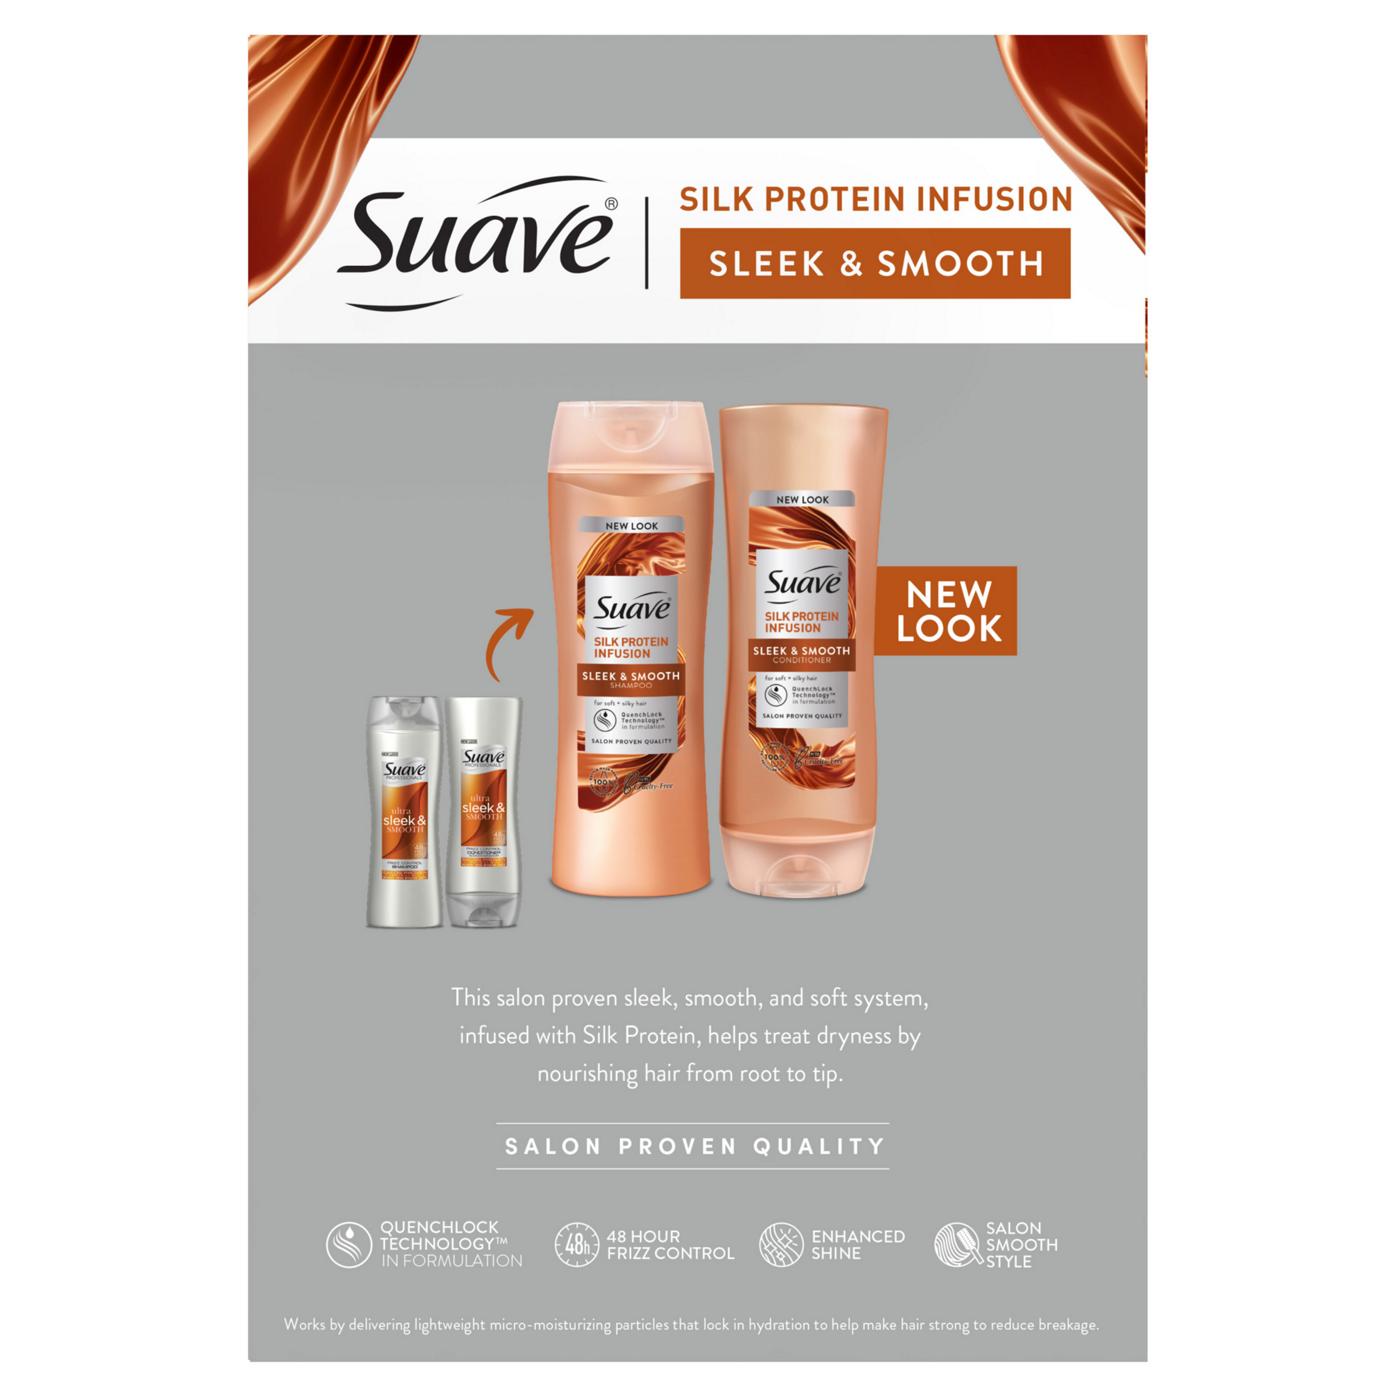 Suave Shampoo and Conditioner Silk Protein Infusion - Sleek & Smooth; image 2 of 3